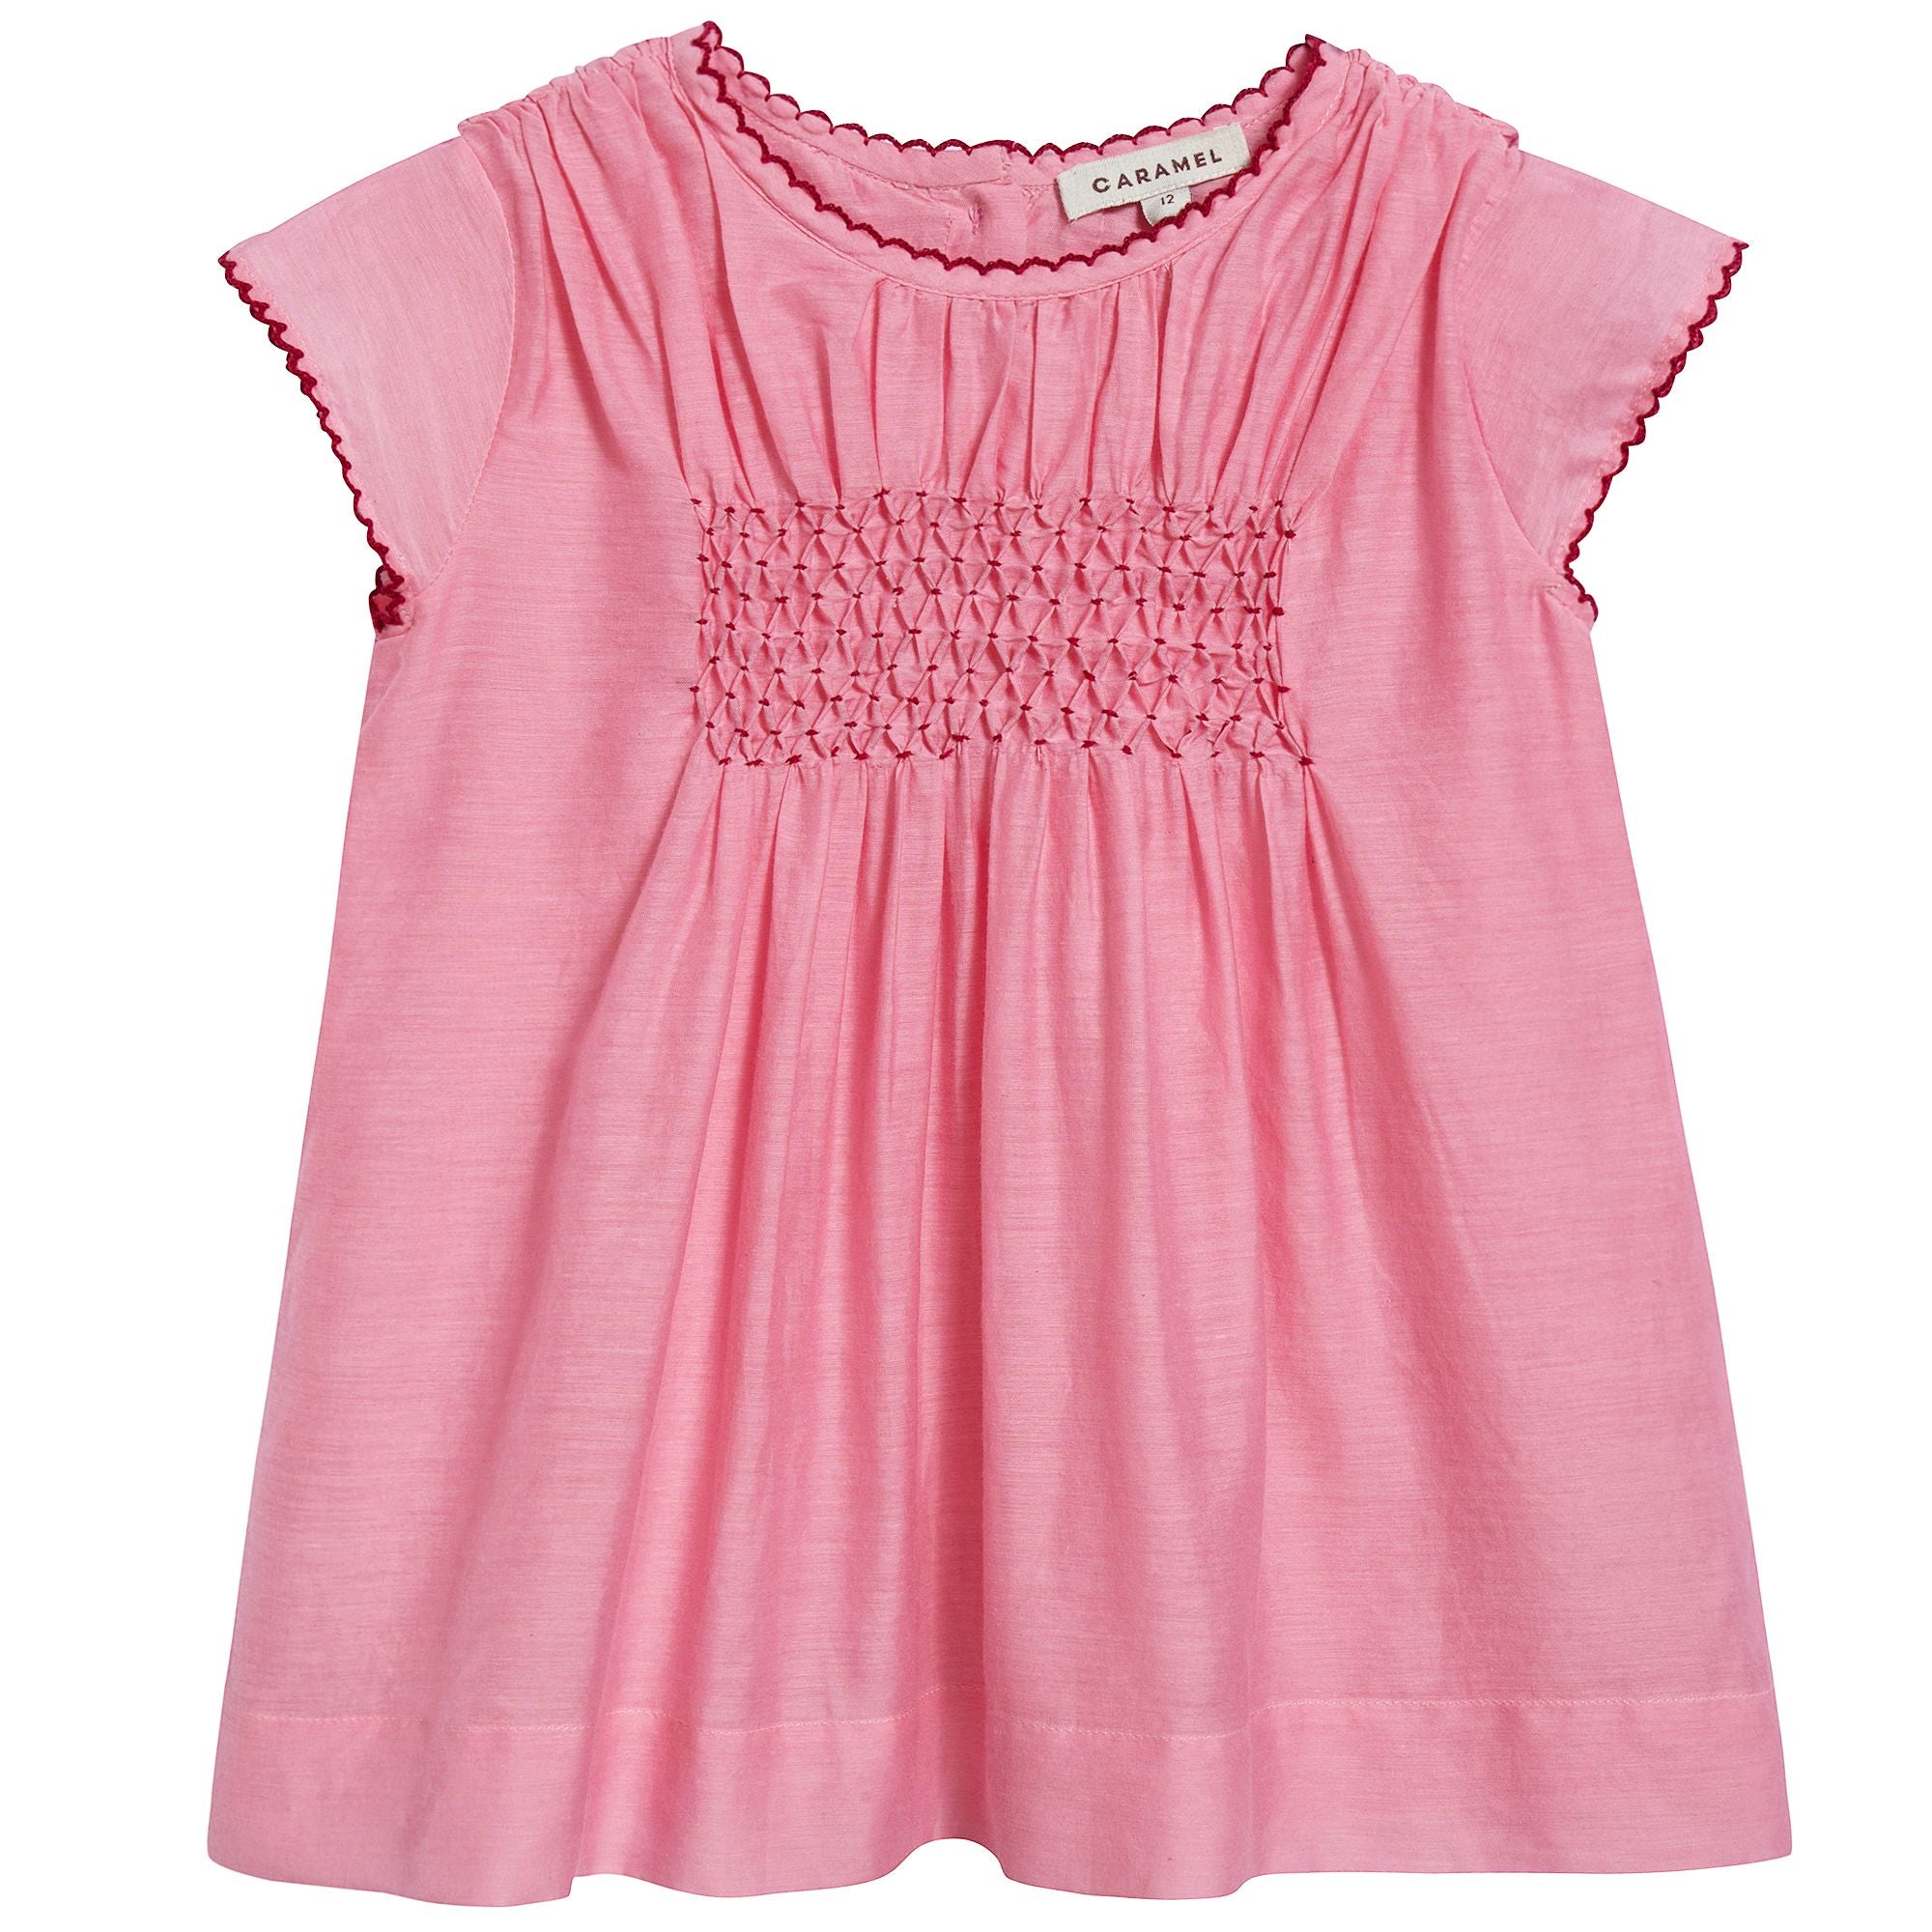 Baby Girls Candy Pink Cotton Woven Dress